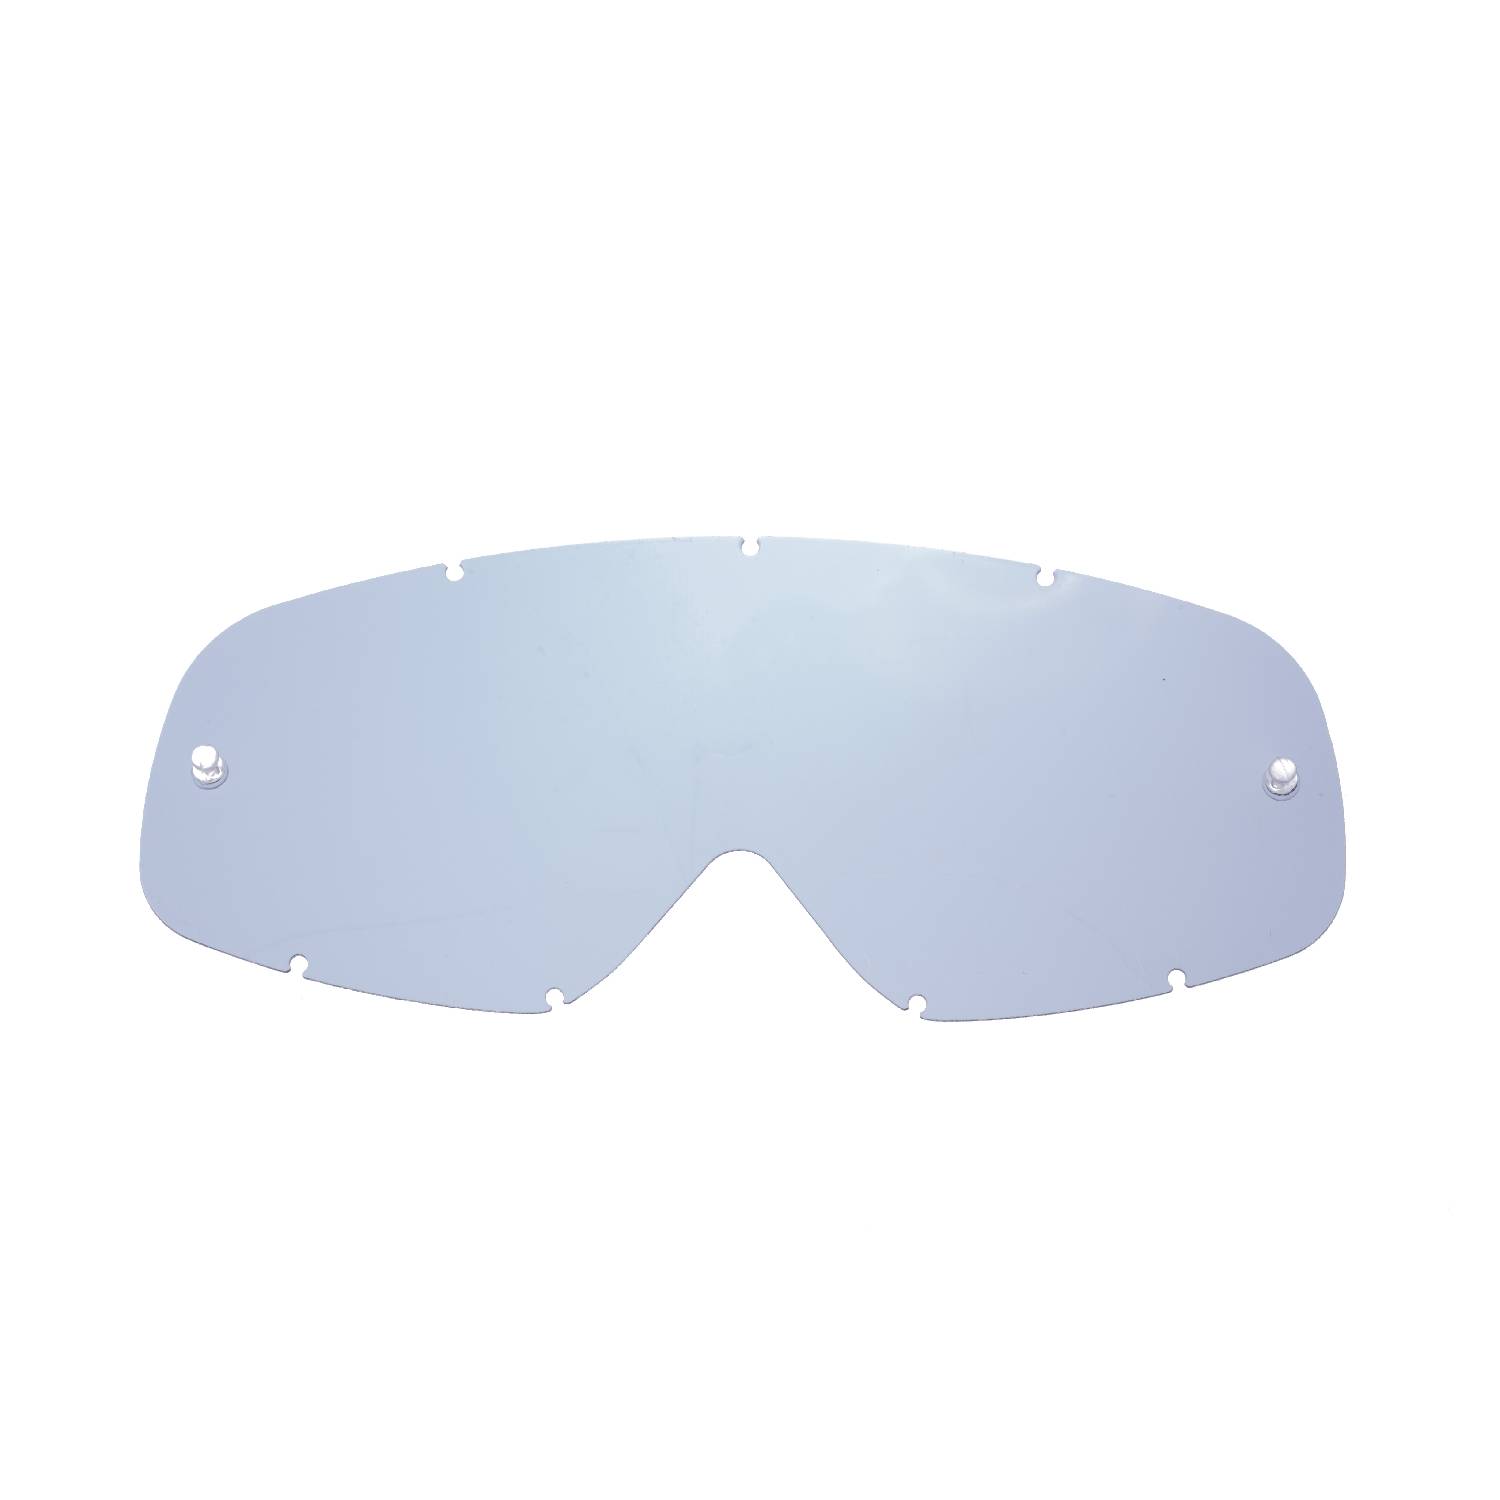 smokey replacement lenses for goggles compatible for Oakley O-frame goggle